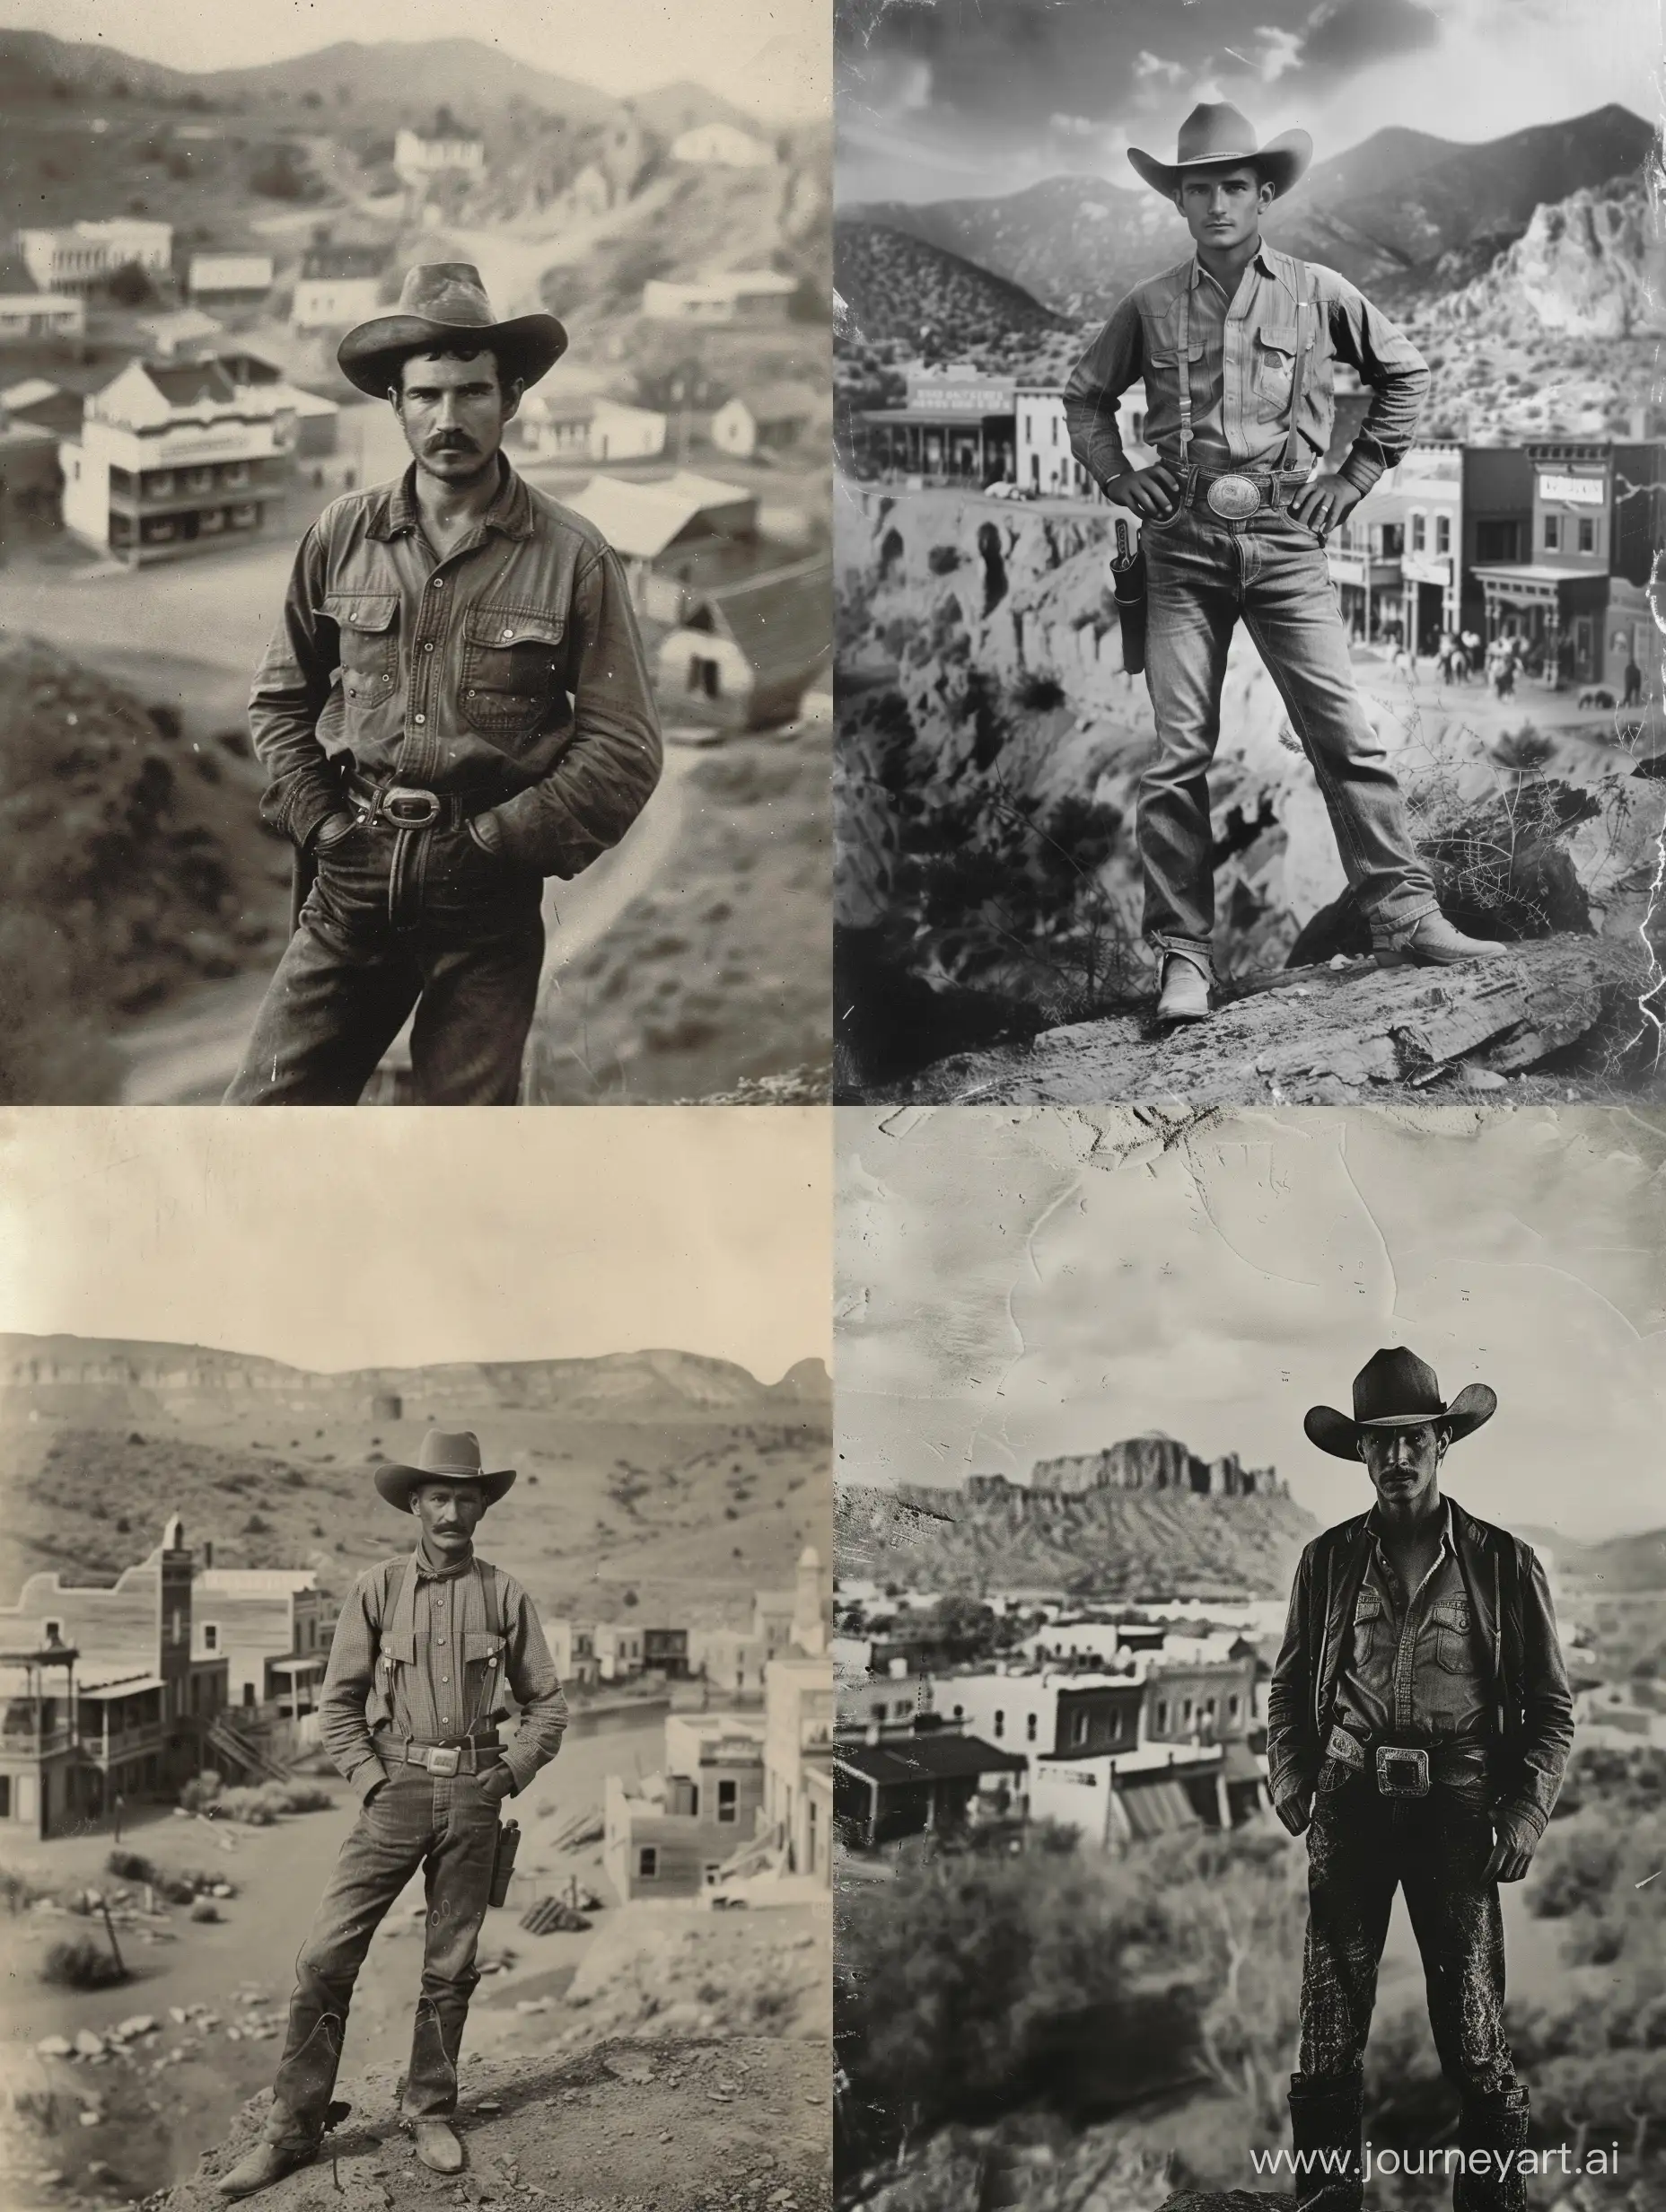 black and white photograph of a cowboy posing in front of a town in the wild west